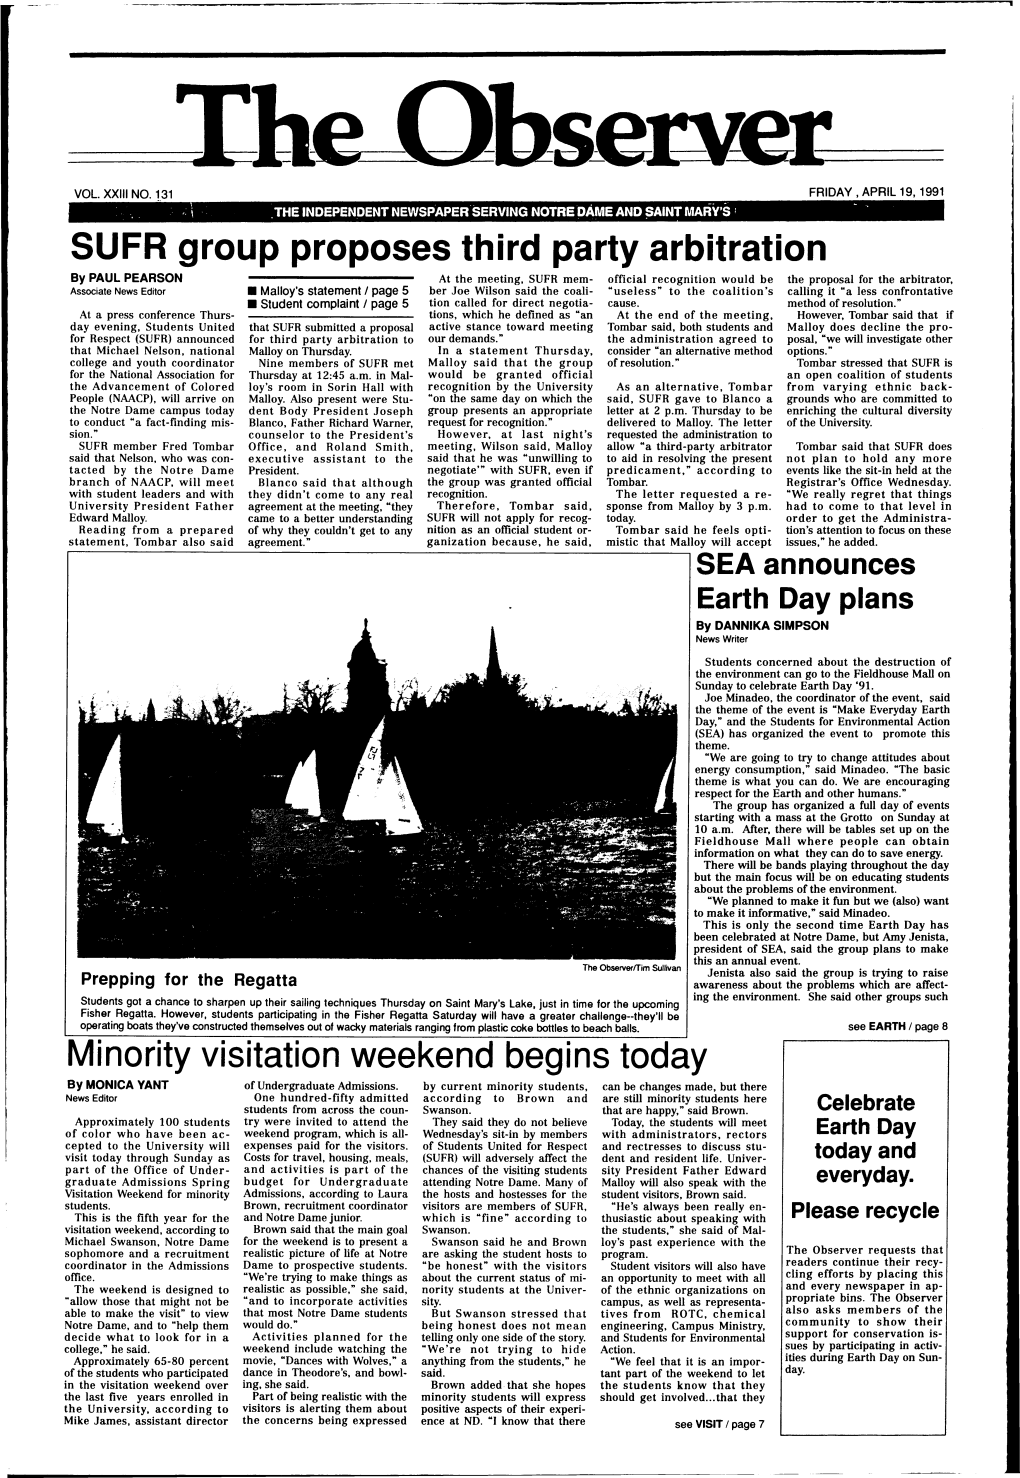 SUFR Group Proposes Third Party Arbitration